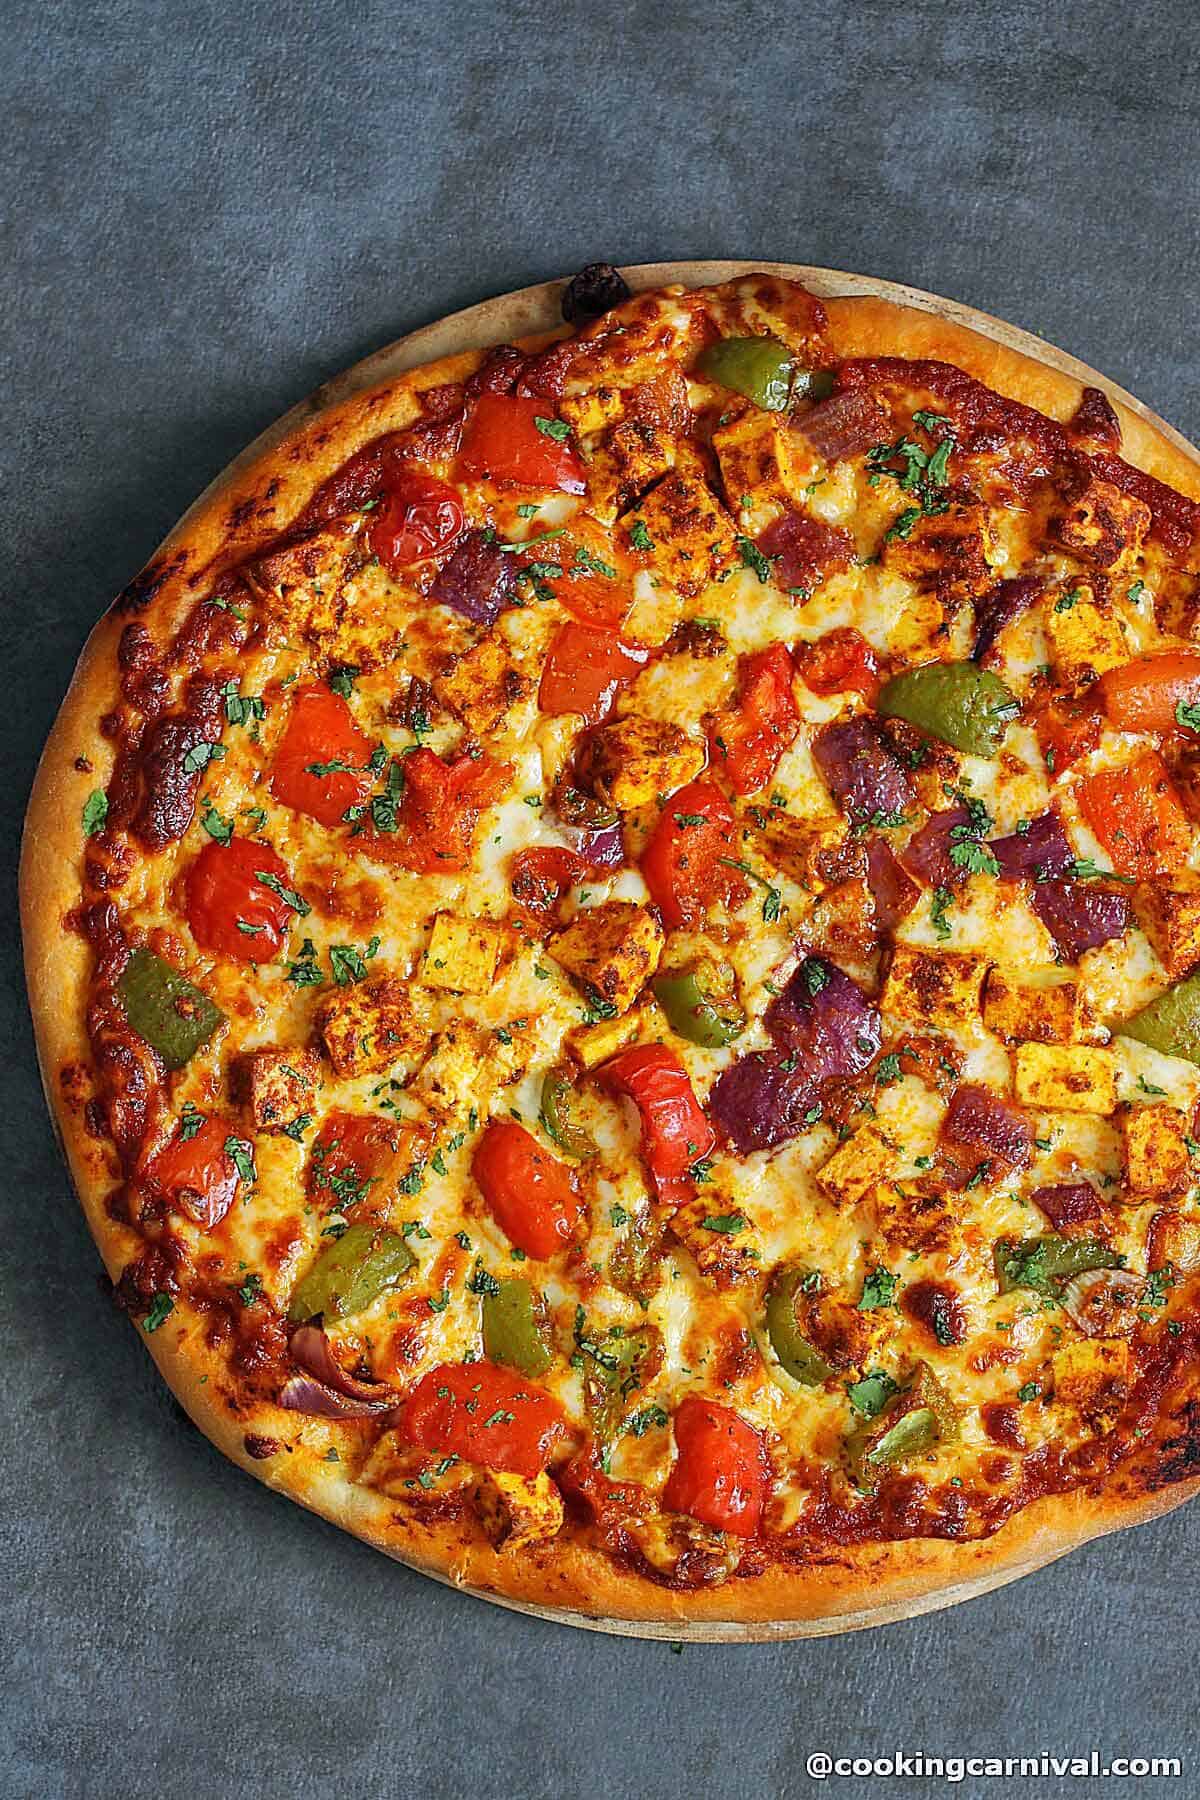 A pizza made with paneer, onion and bel pepper.